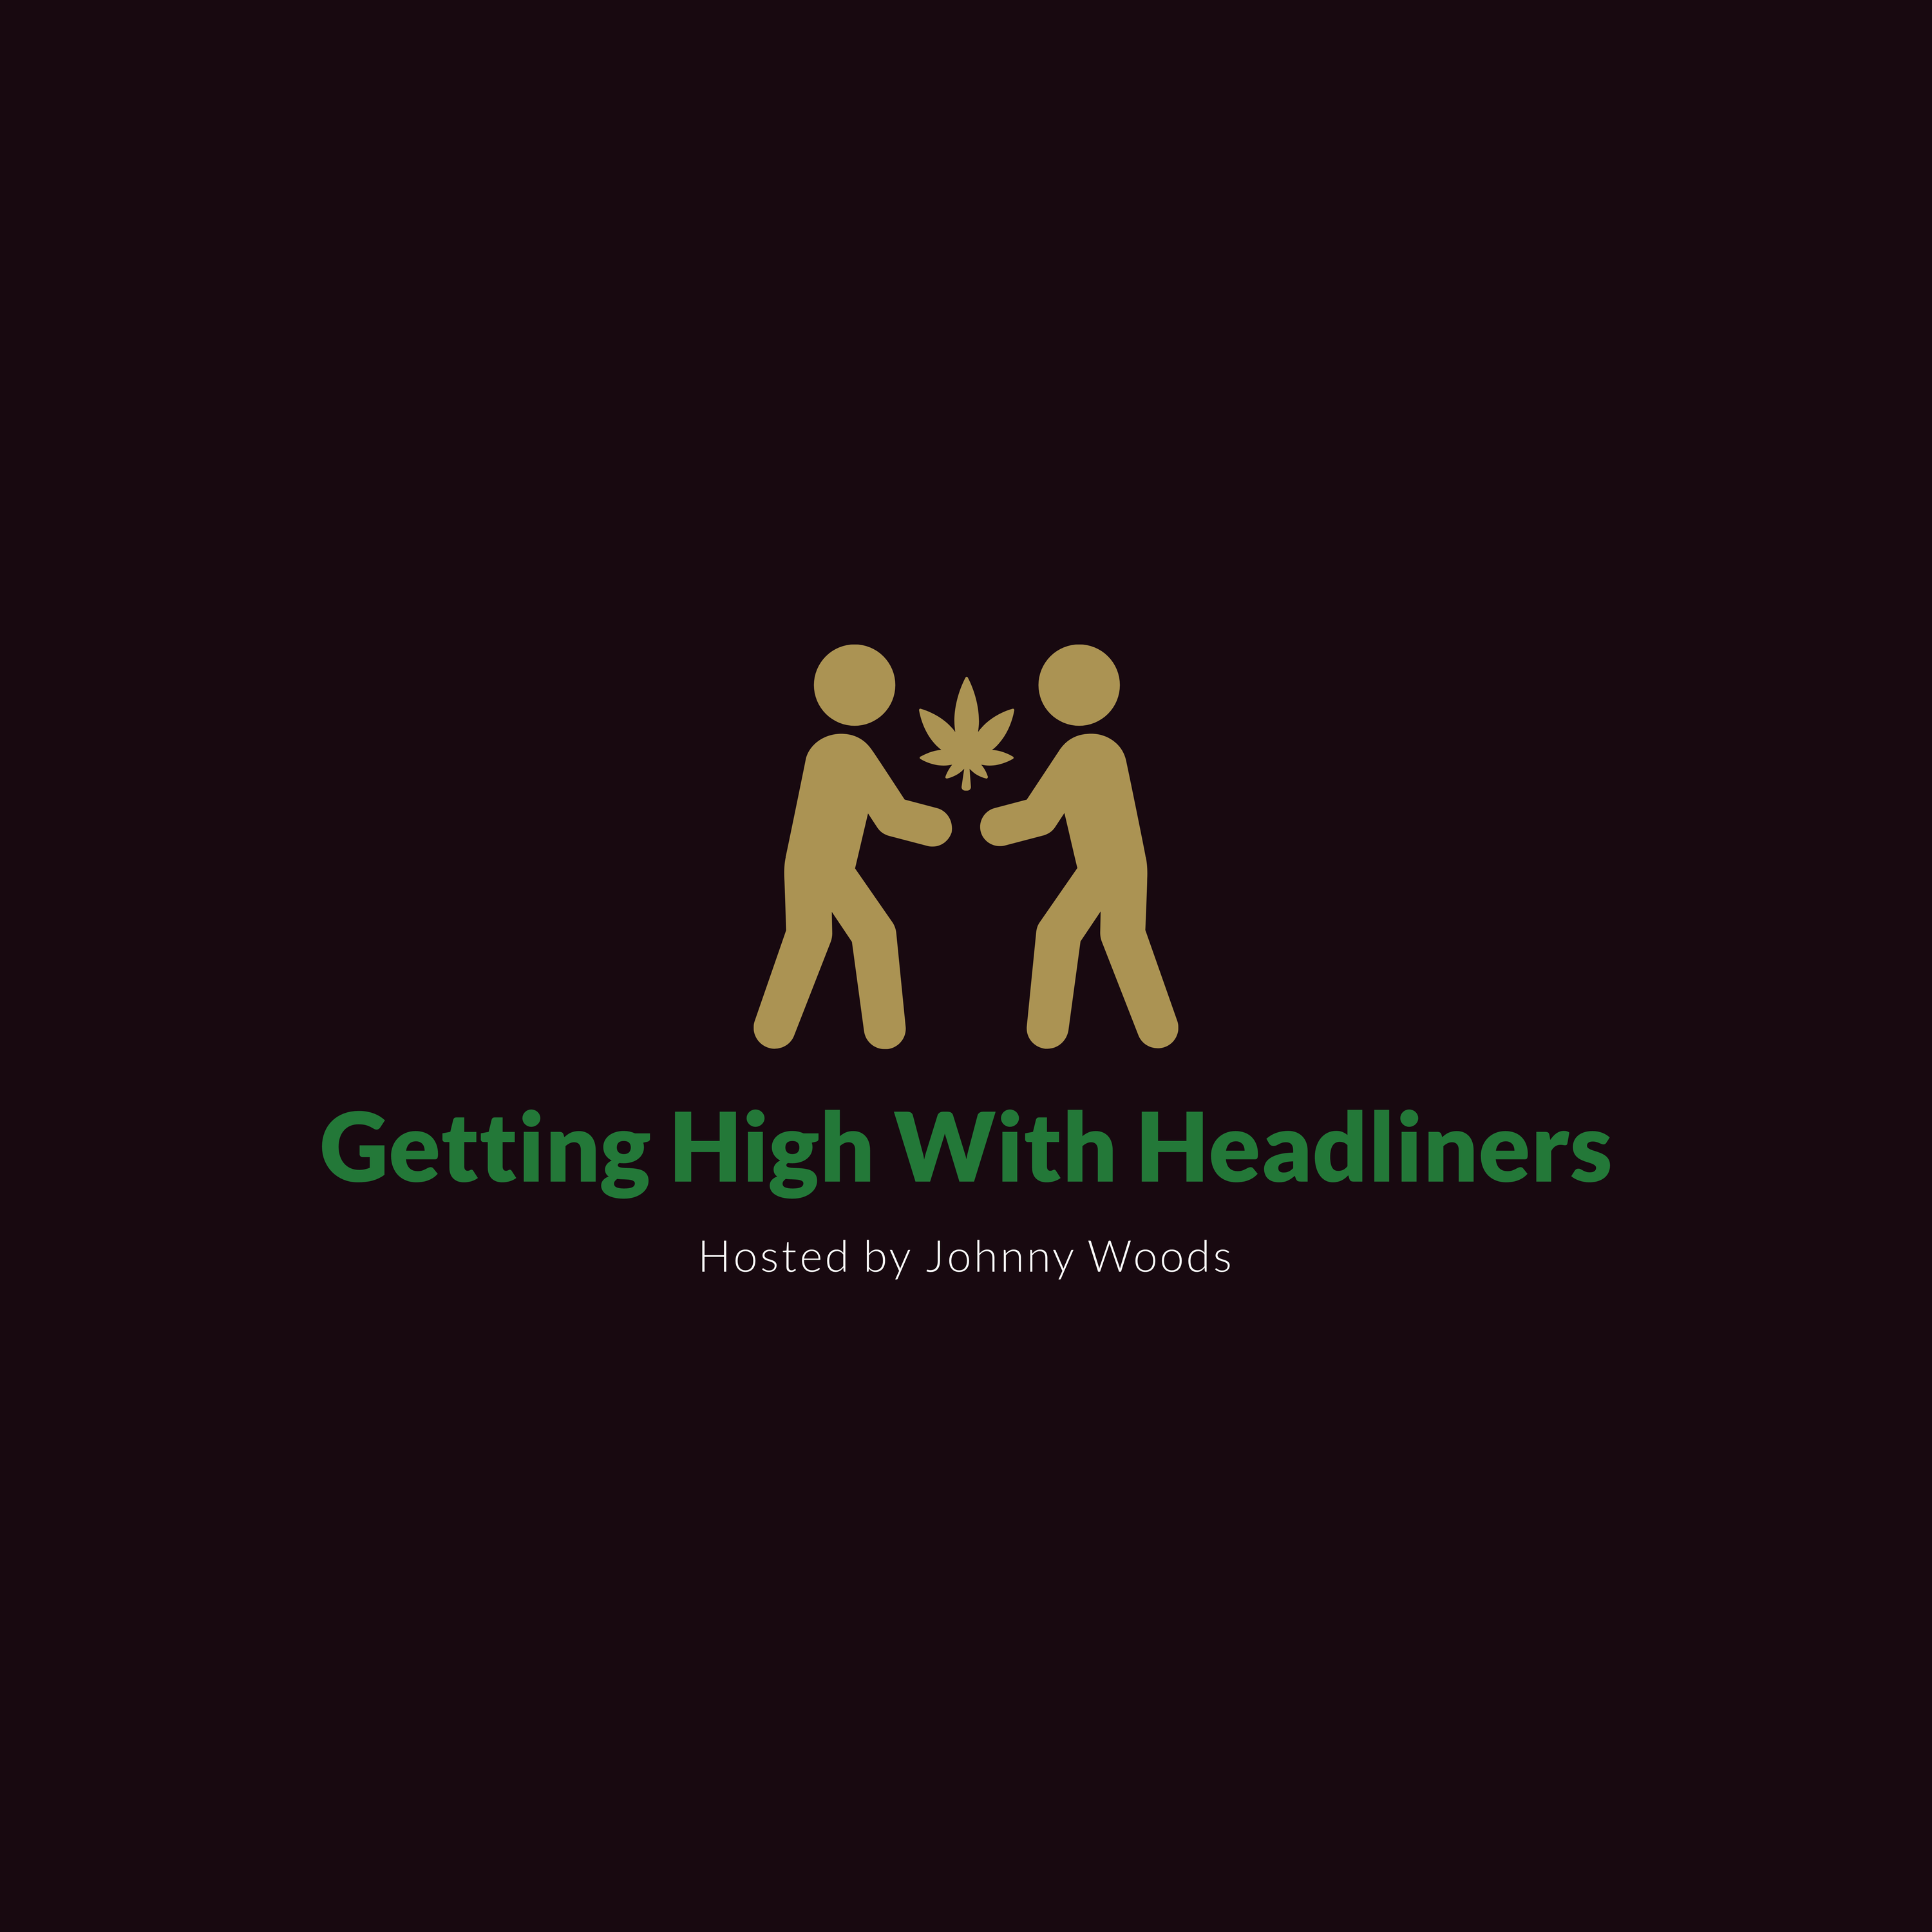 Getting high with headliners #2 Kevin Rupert